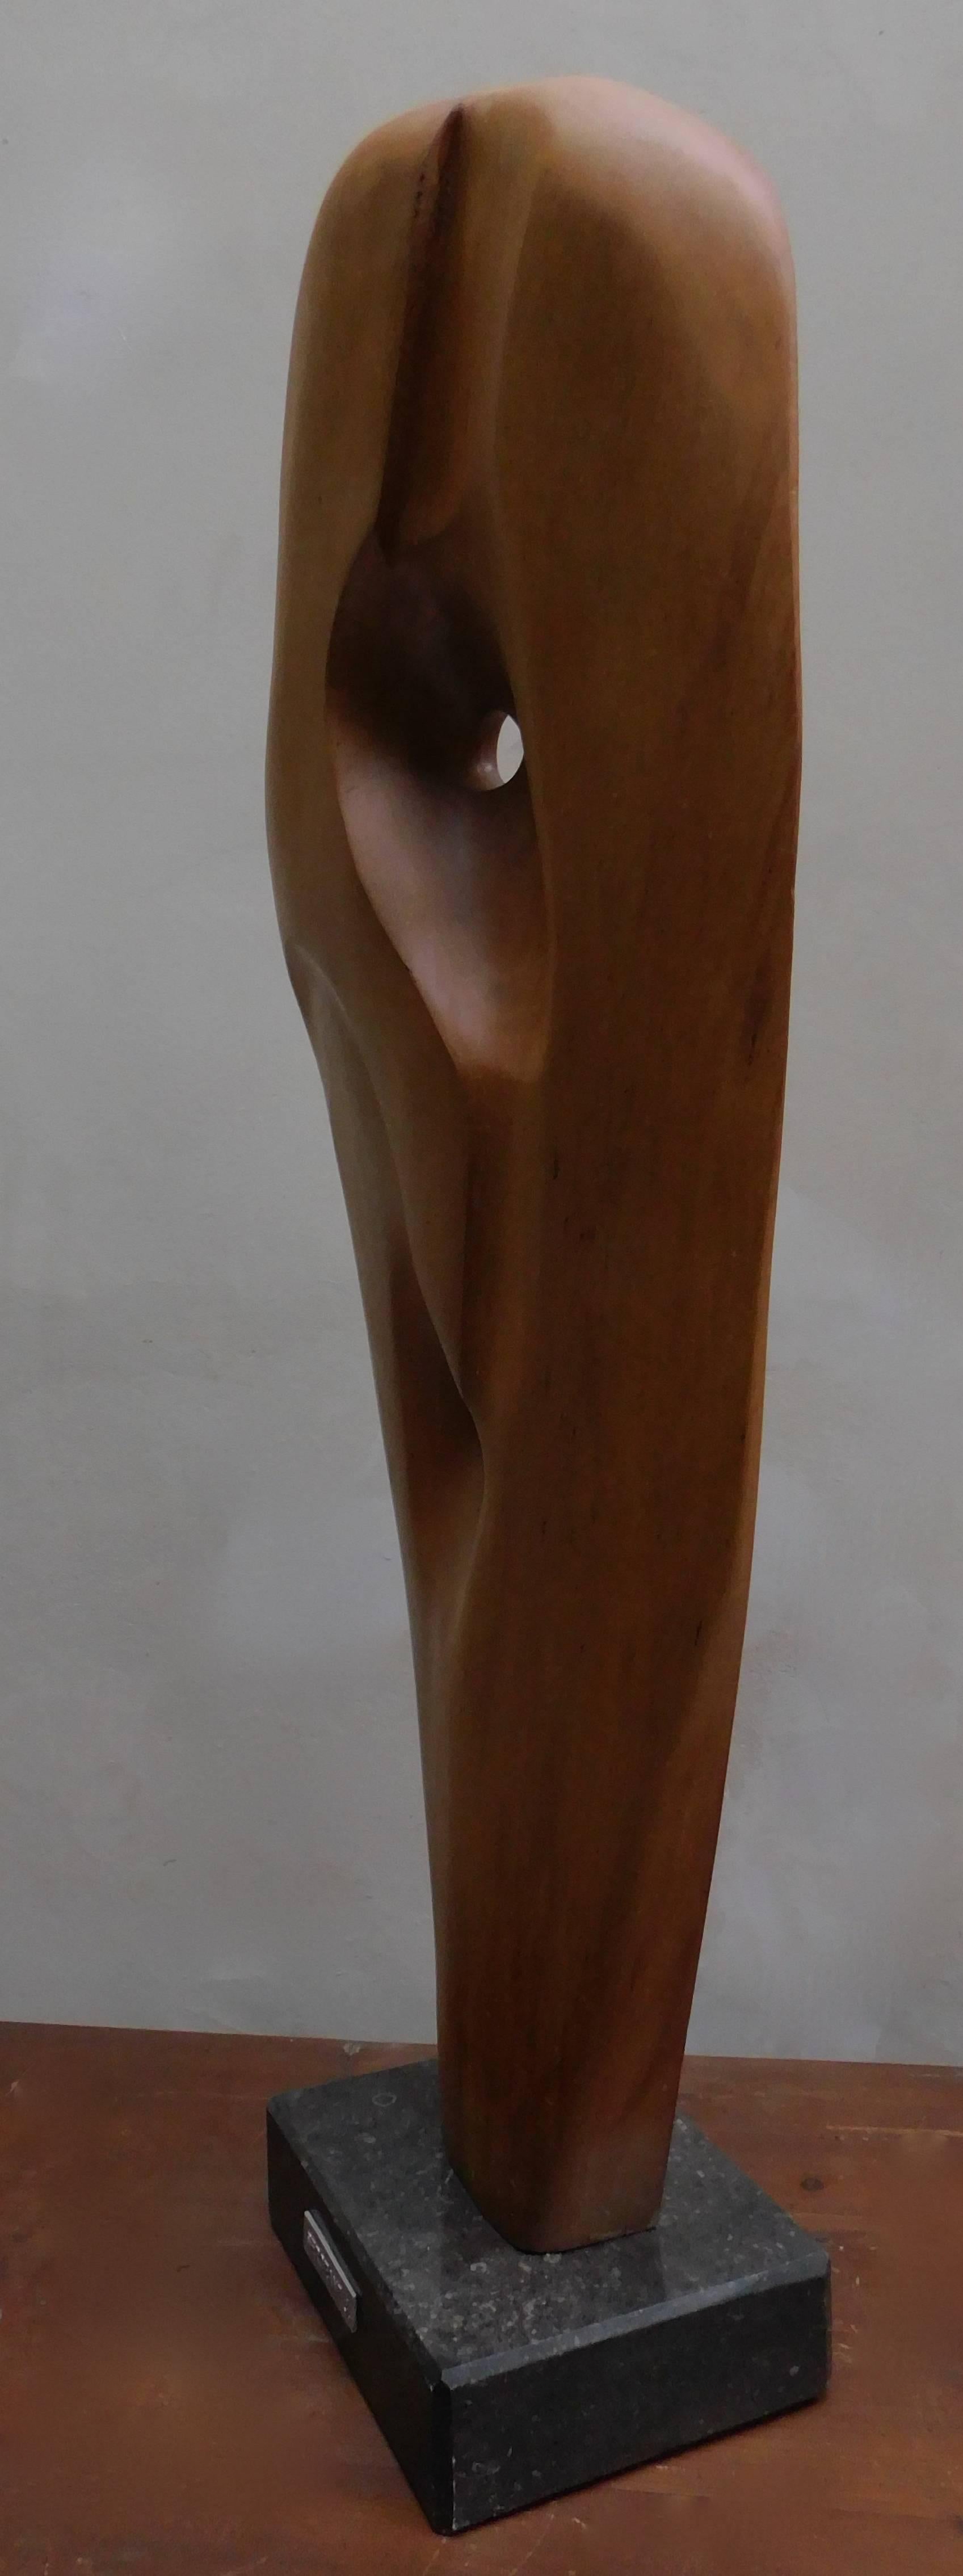 Belgian Carved Wood Mid-Century Modern Curvaceous Abstract Statue by Jan Sergeant